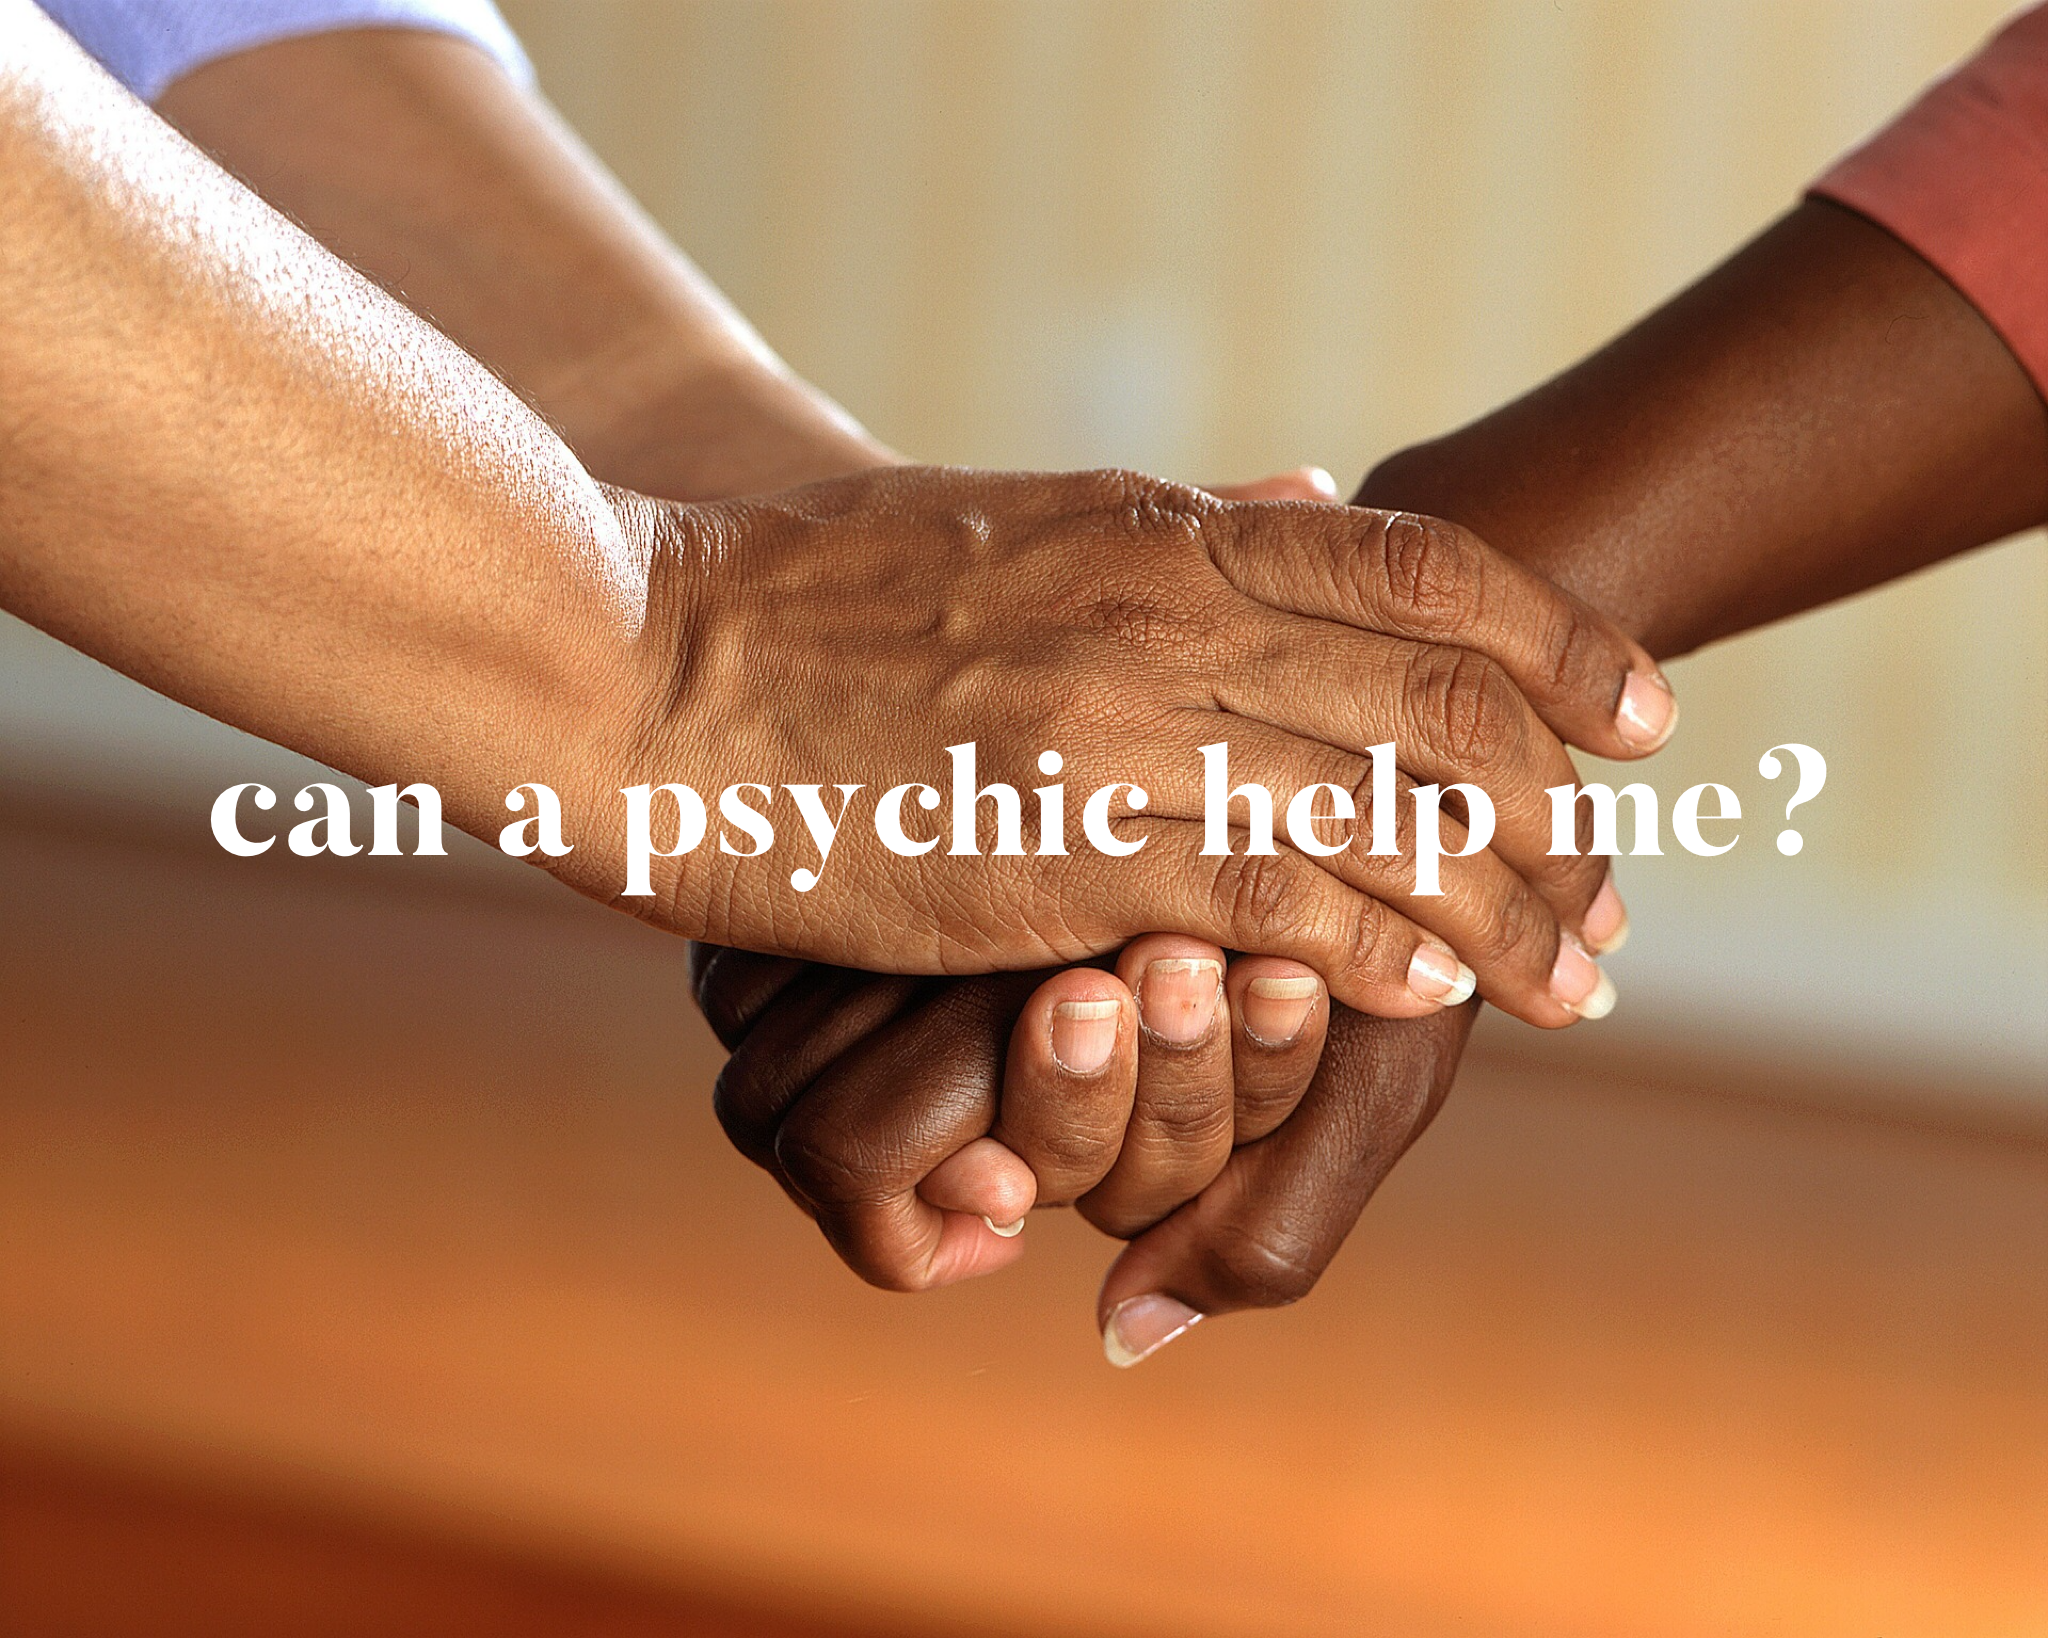 Can a psychic help me? What type of psychic should I choose?